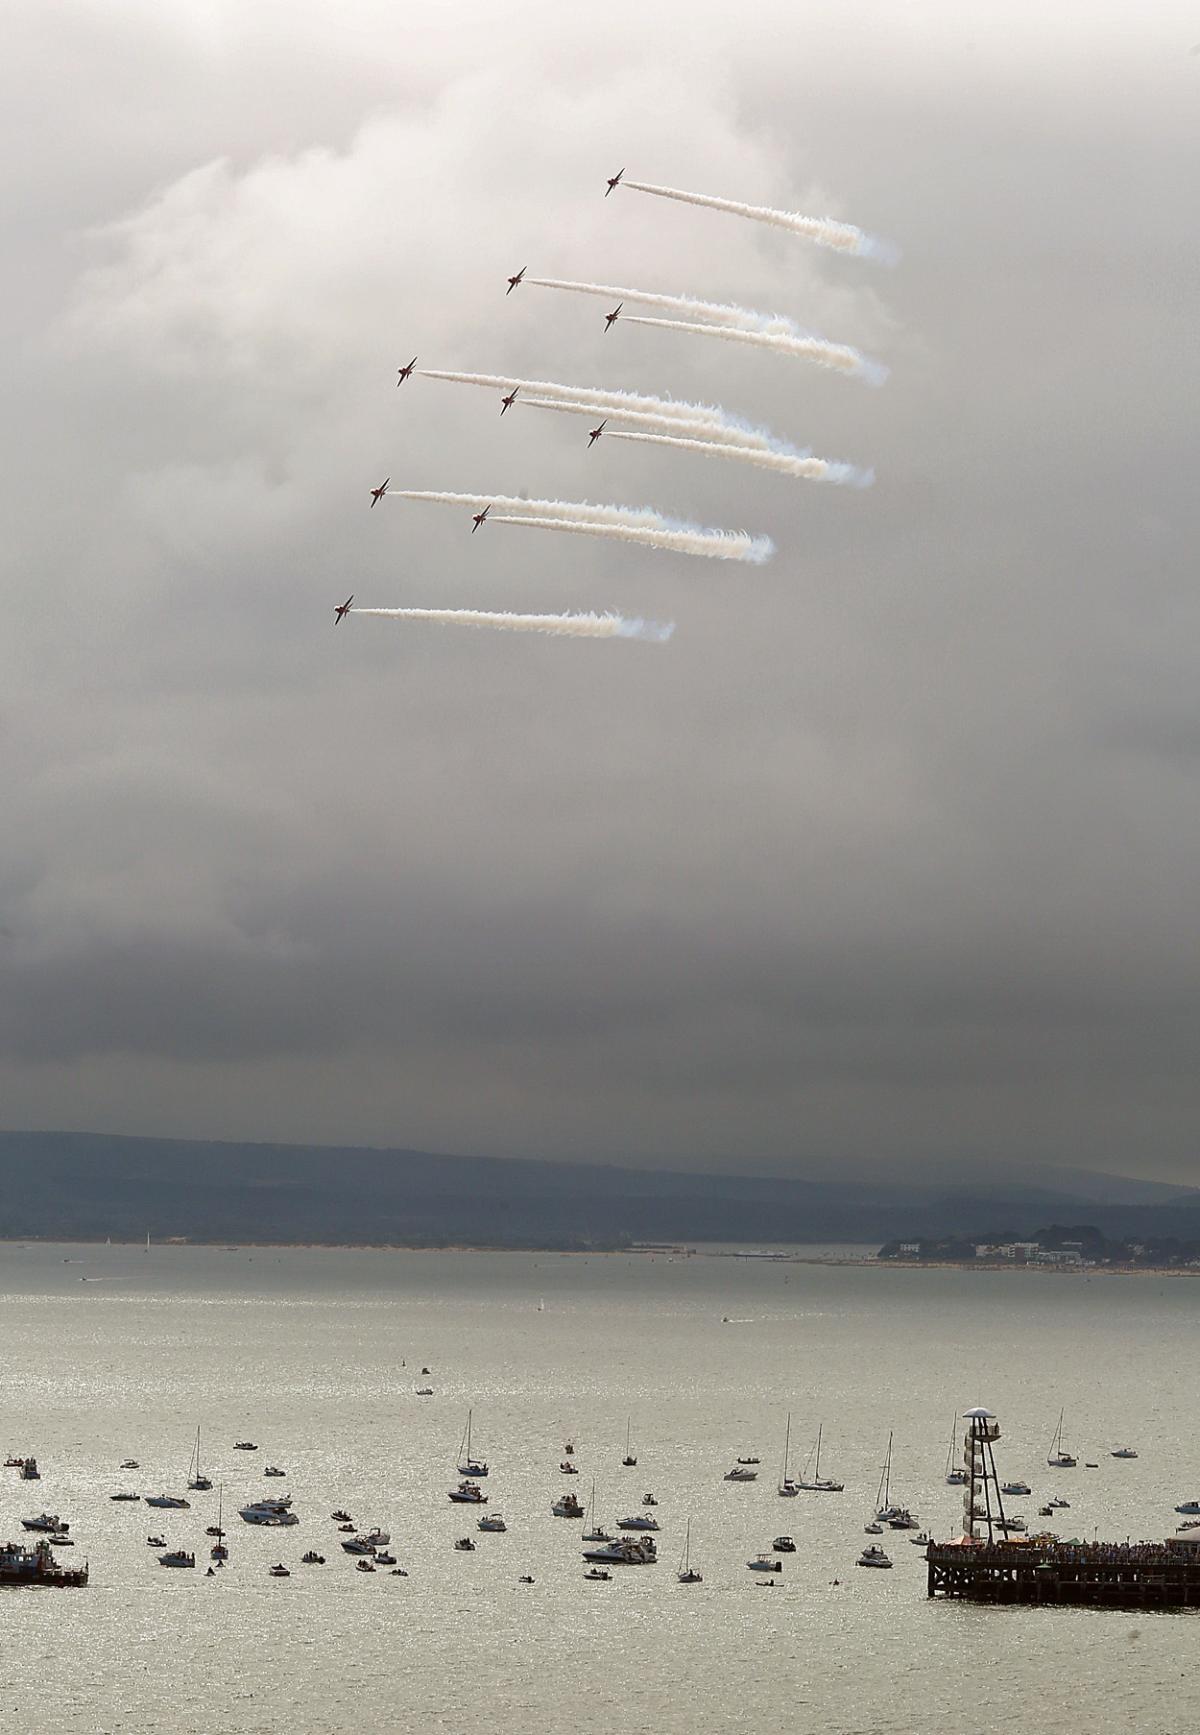 All the action from Friday at the Bournemouth Air Festival 2015. Pictures: Sally Adams